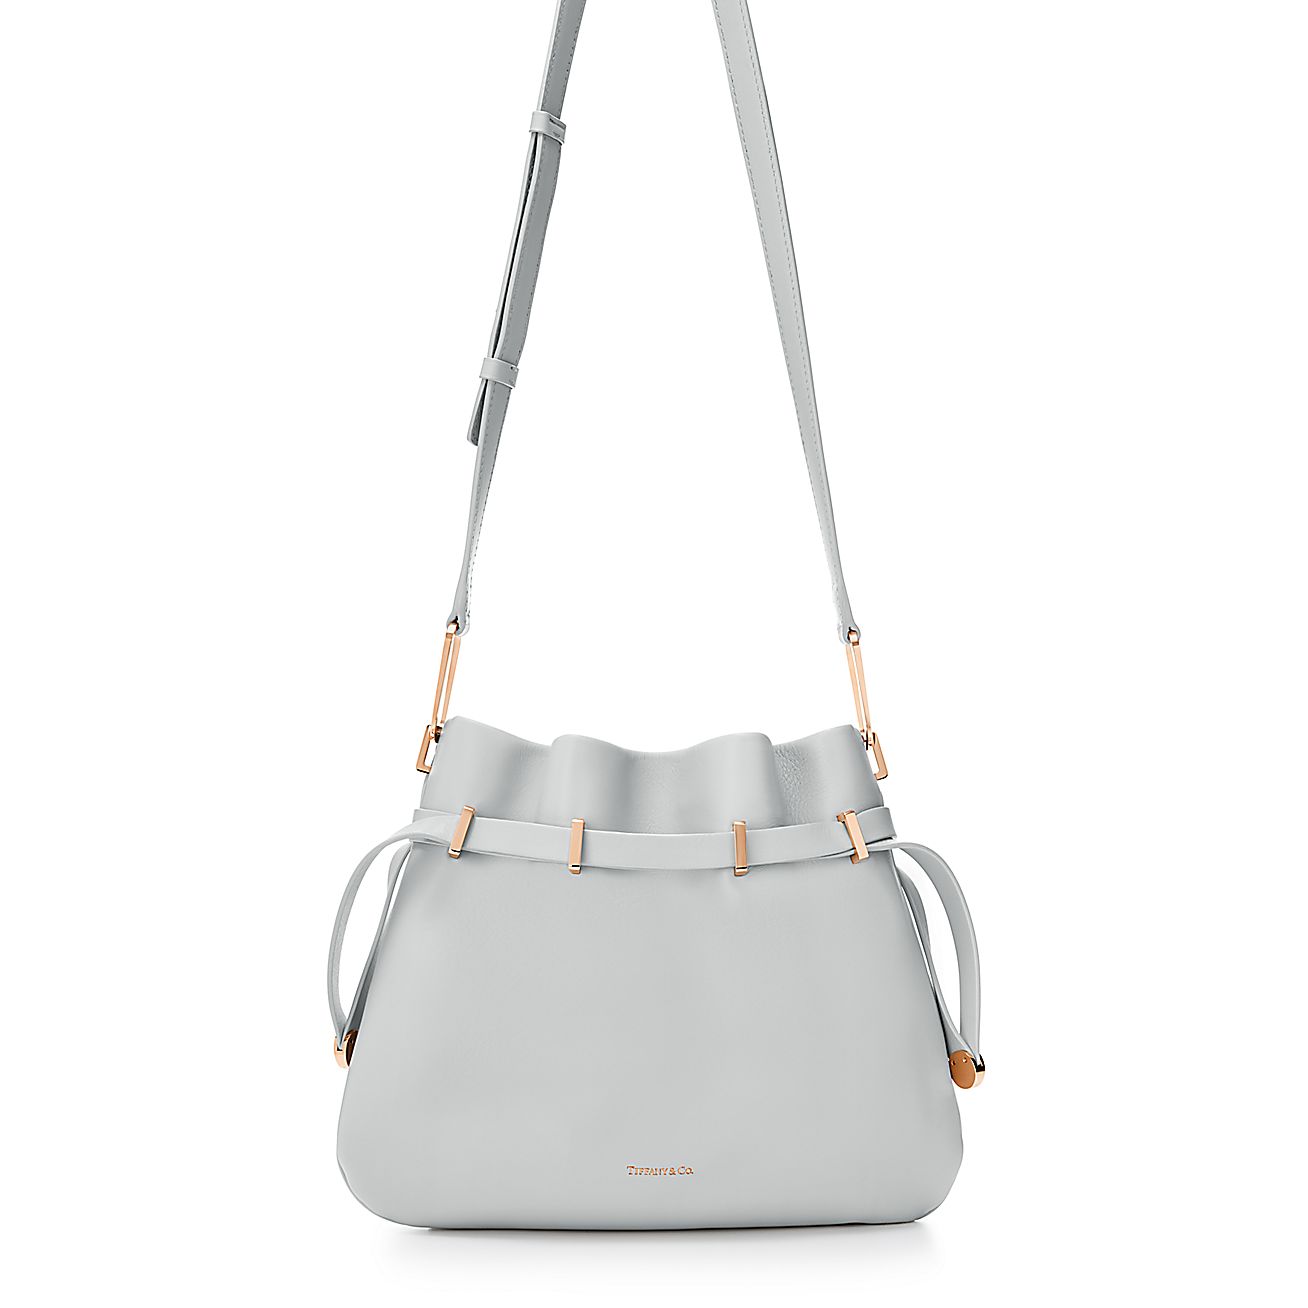 Blair crossbody bag in ice smooth leather. More colors available ...